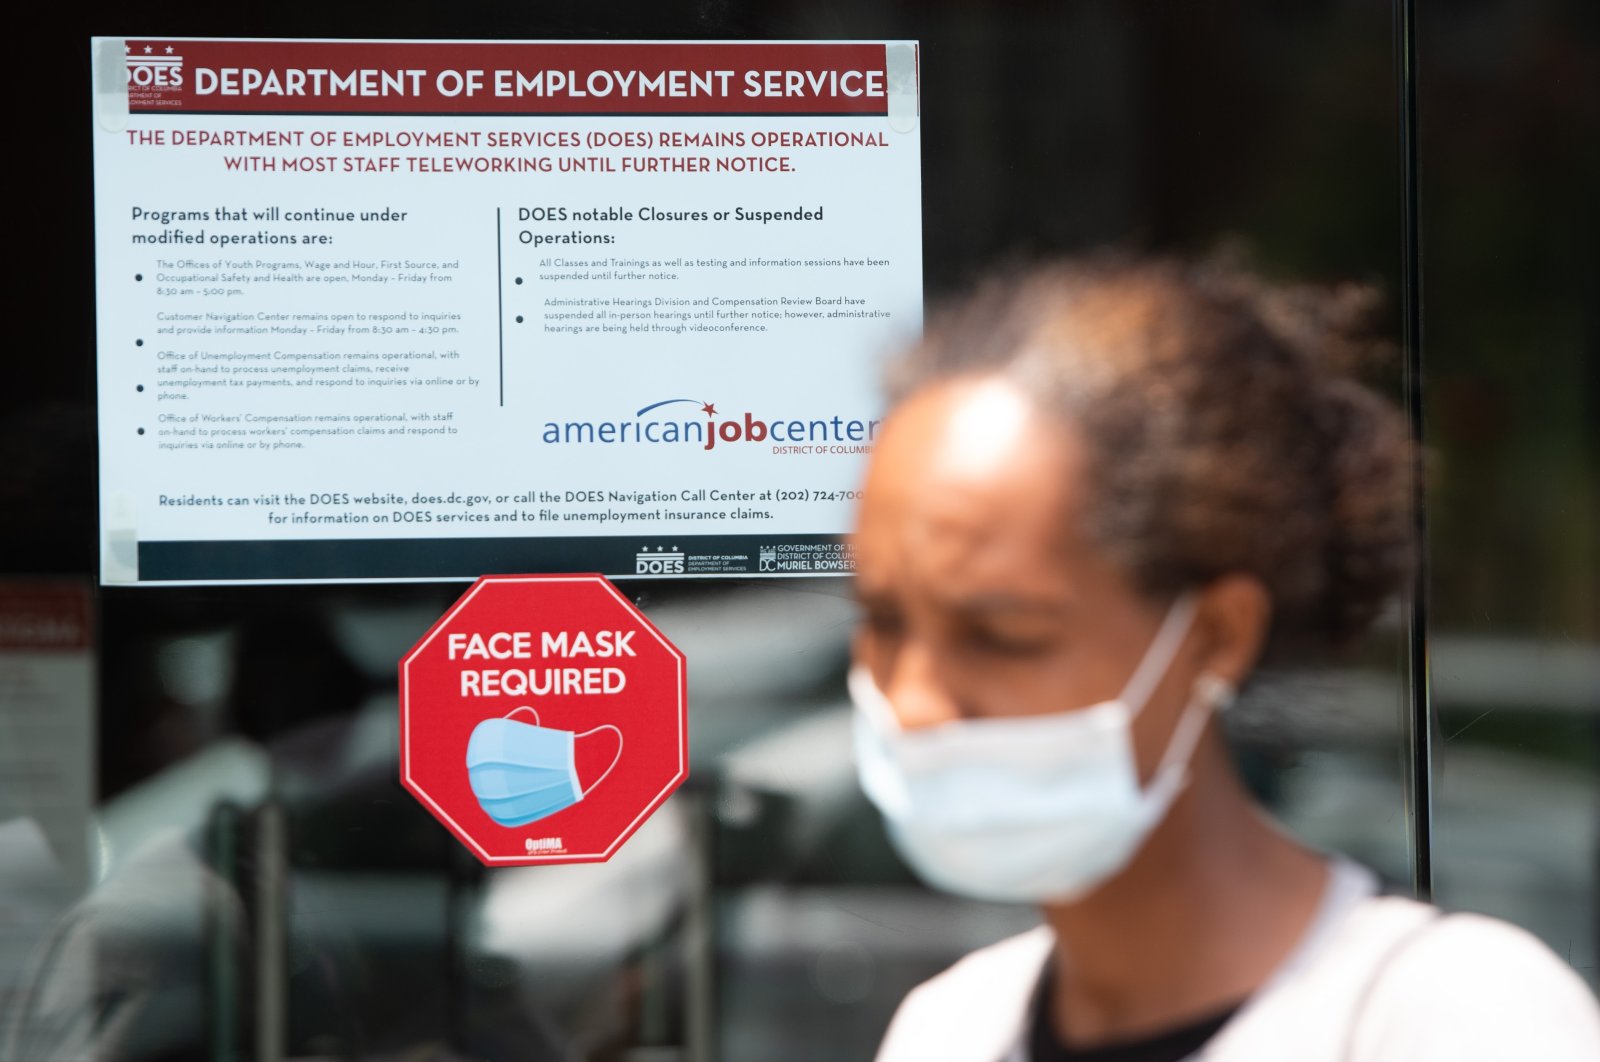 Diana Yitbarek, 44, leaves the D.C. Department of Employment Services after trying to find out about her unemployment benefits in Washington, D.C., July 16, 2020. (AFP Photo)